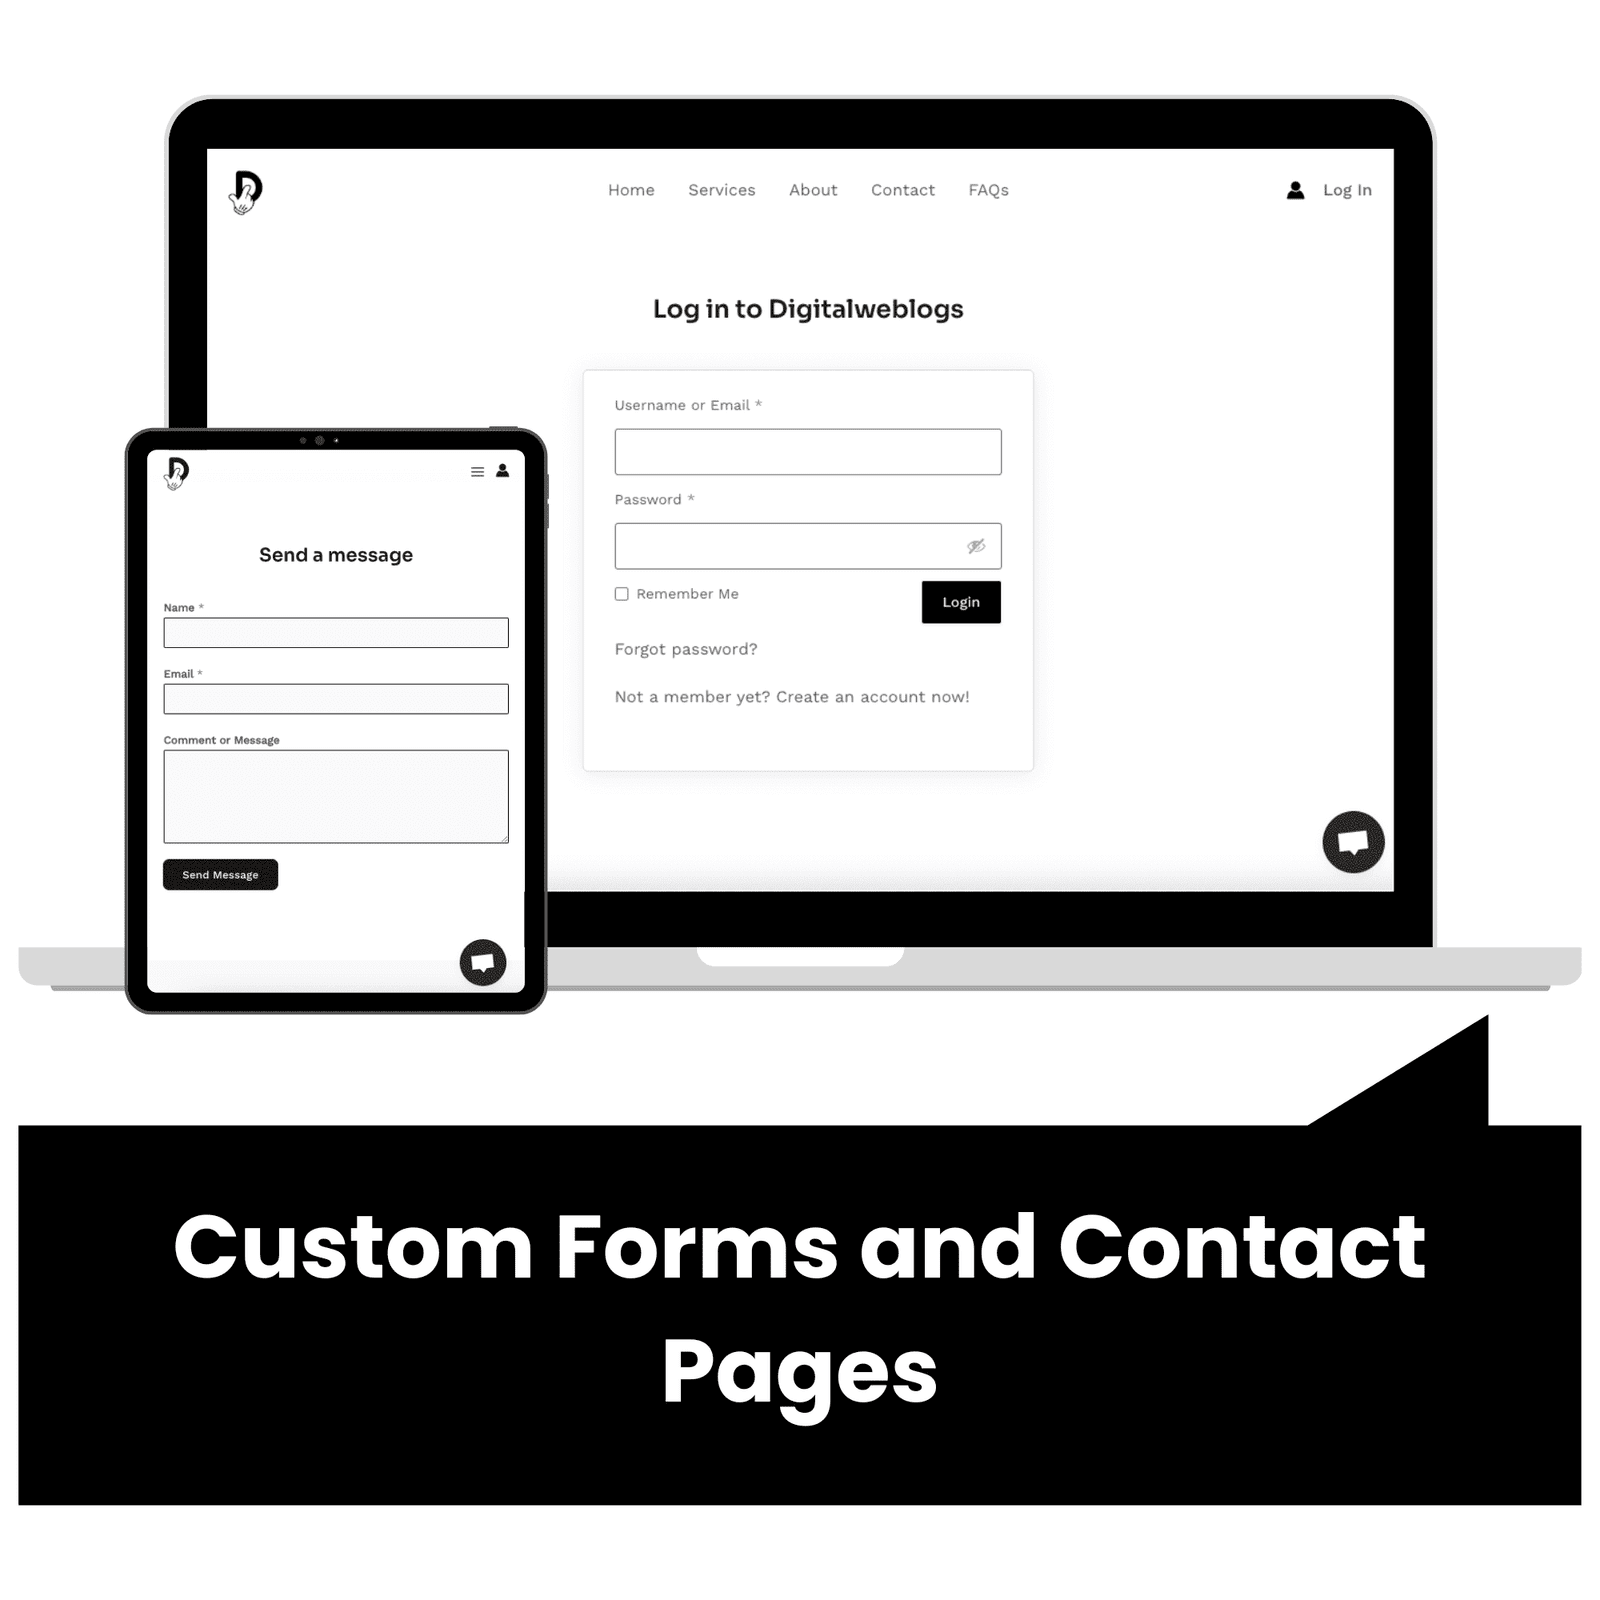 Custom Forms and Contact Pages